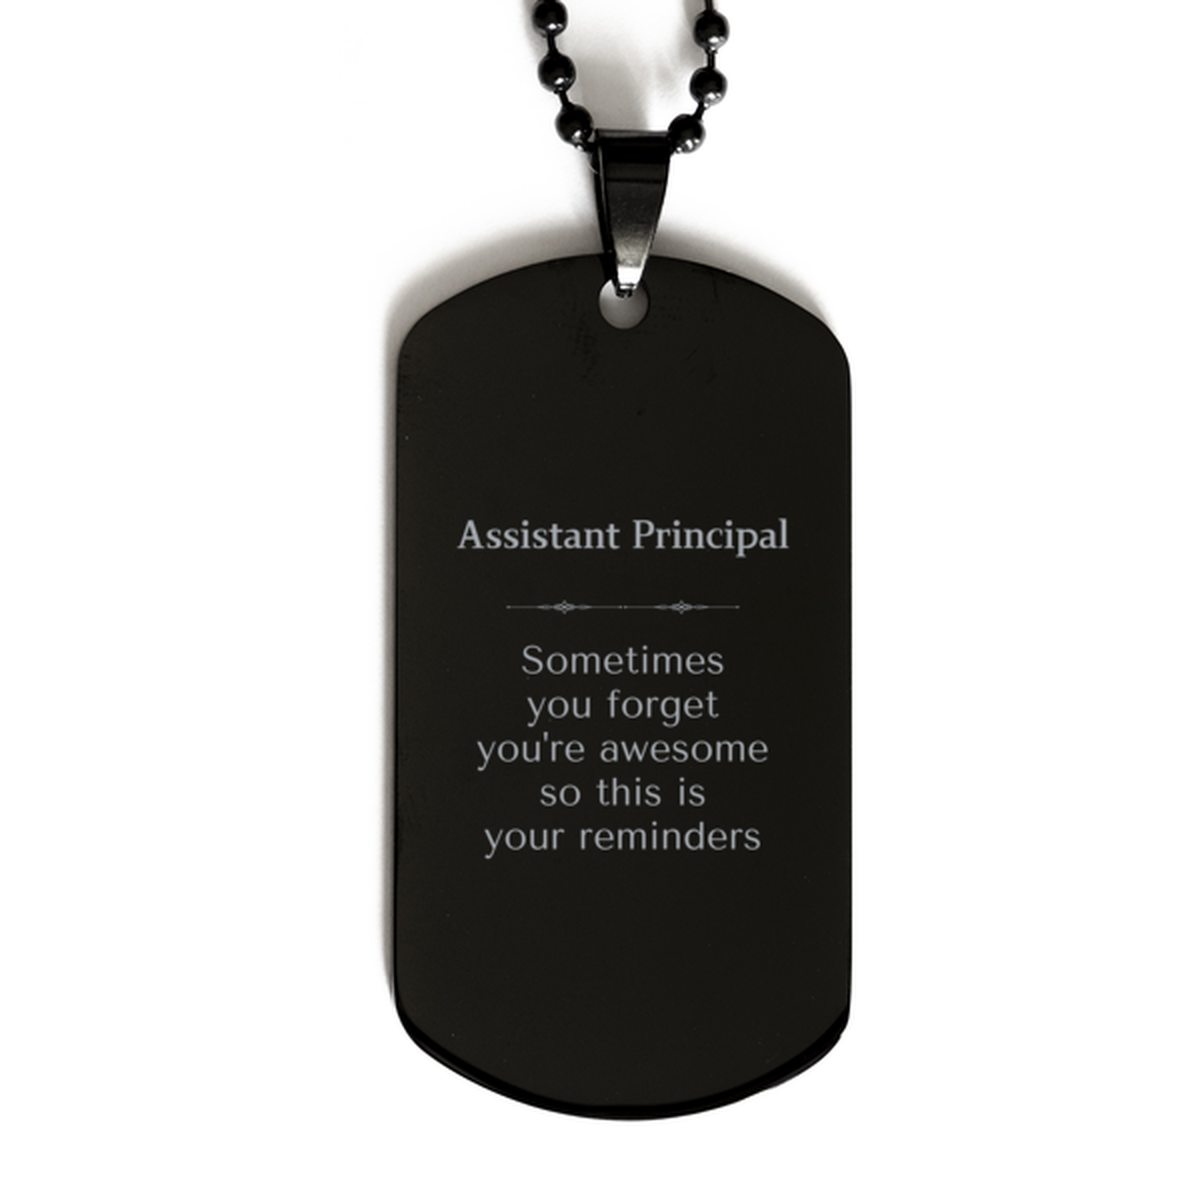 Sentimental Assistant Principal Black Dog Tag, Assistant Principal Sometimes you forget you're awesome so this is your reminders, Graduation Christmas Birthday Gifts for Assistant Principal, Men, Women, Coworkers